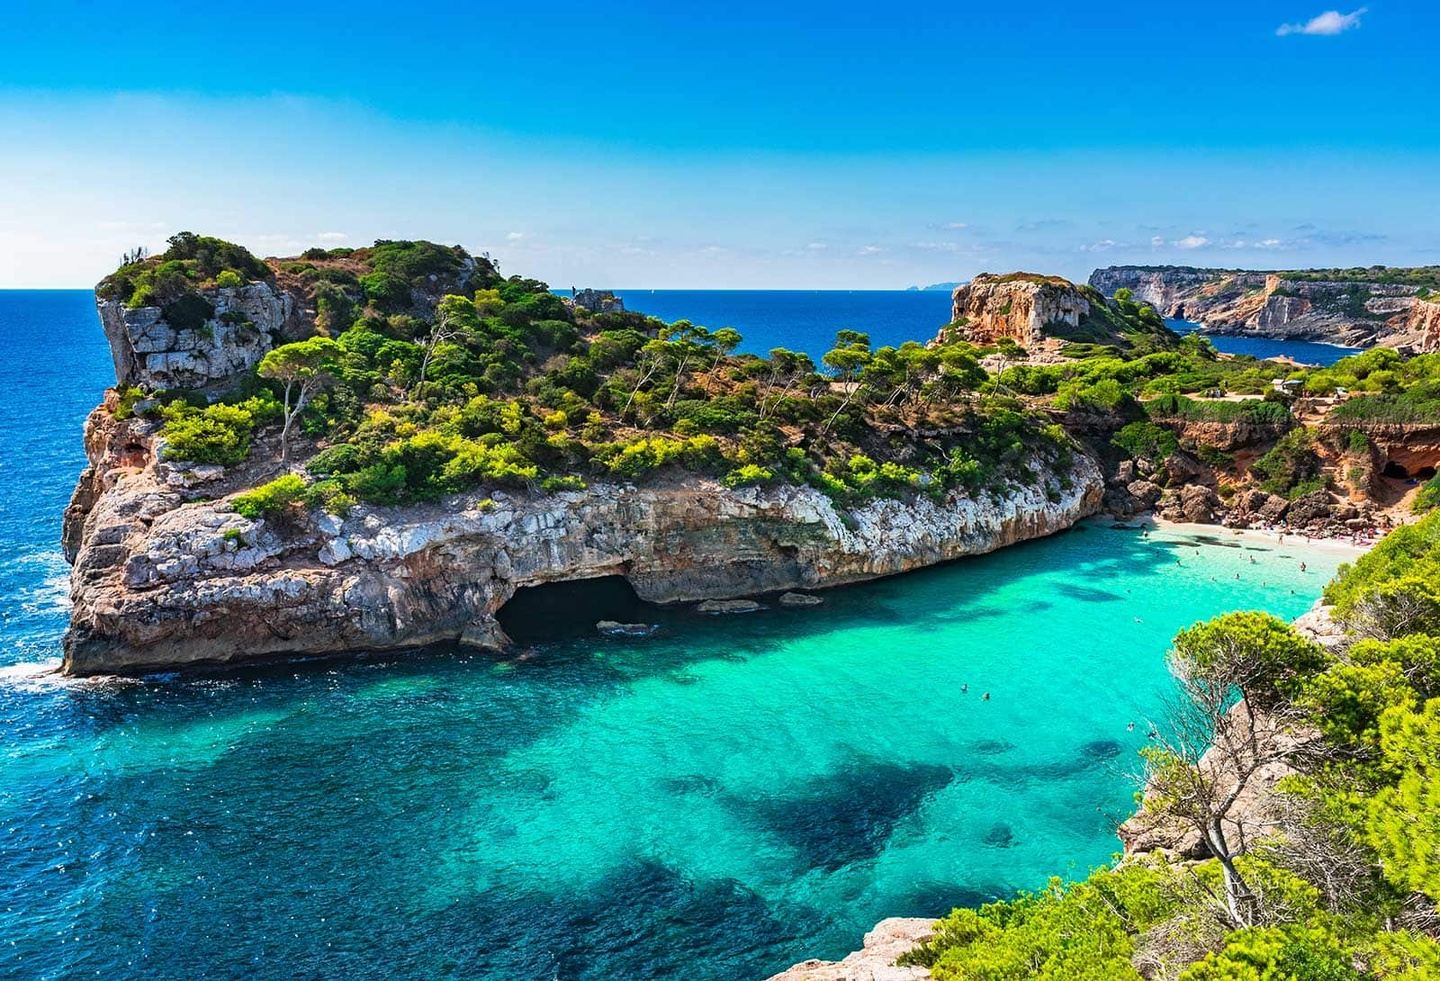 4 Affordable Villas in Mallorca You Should Check Out